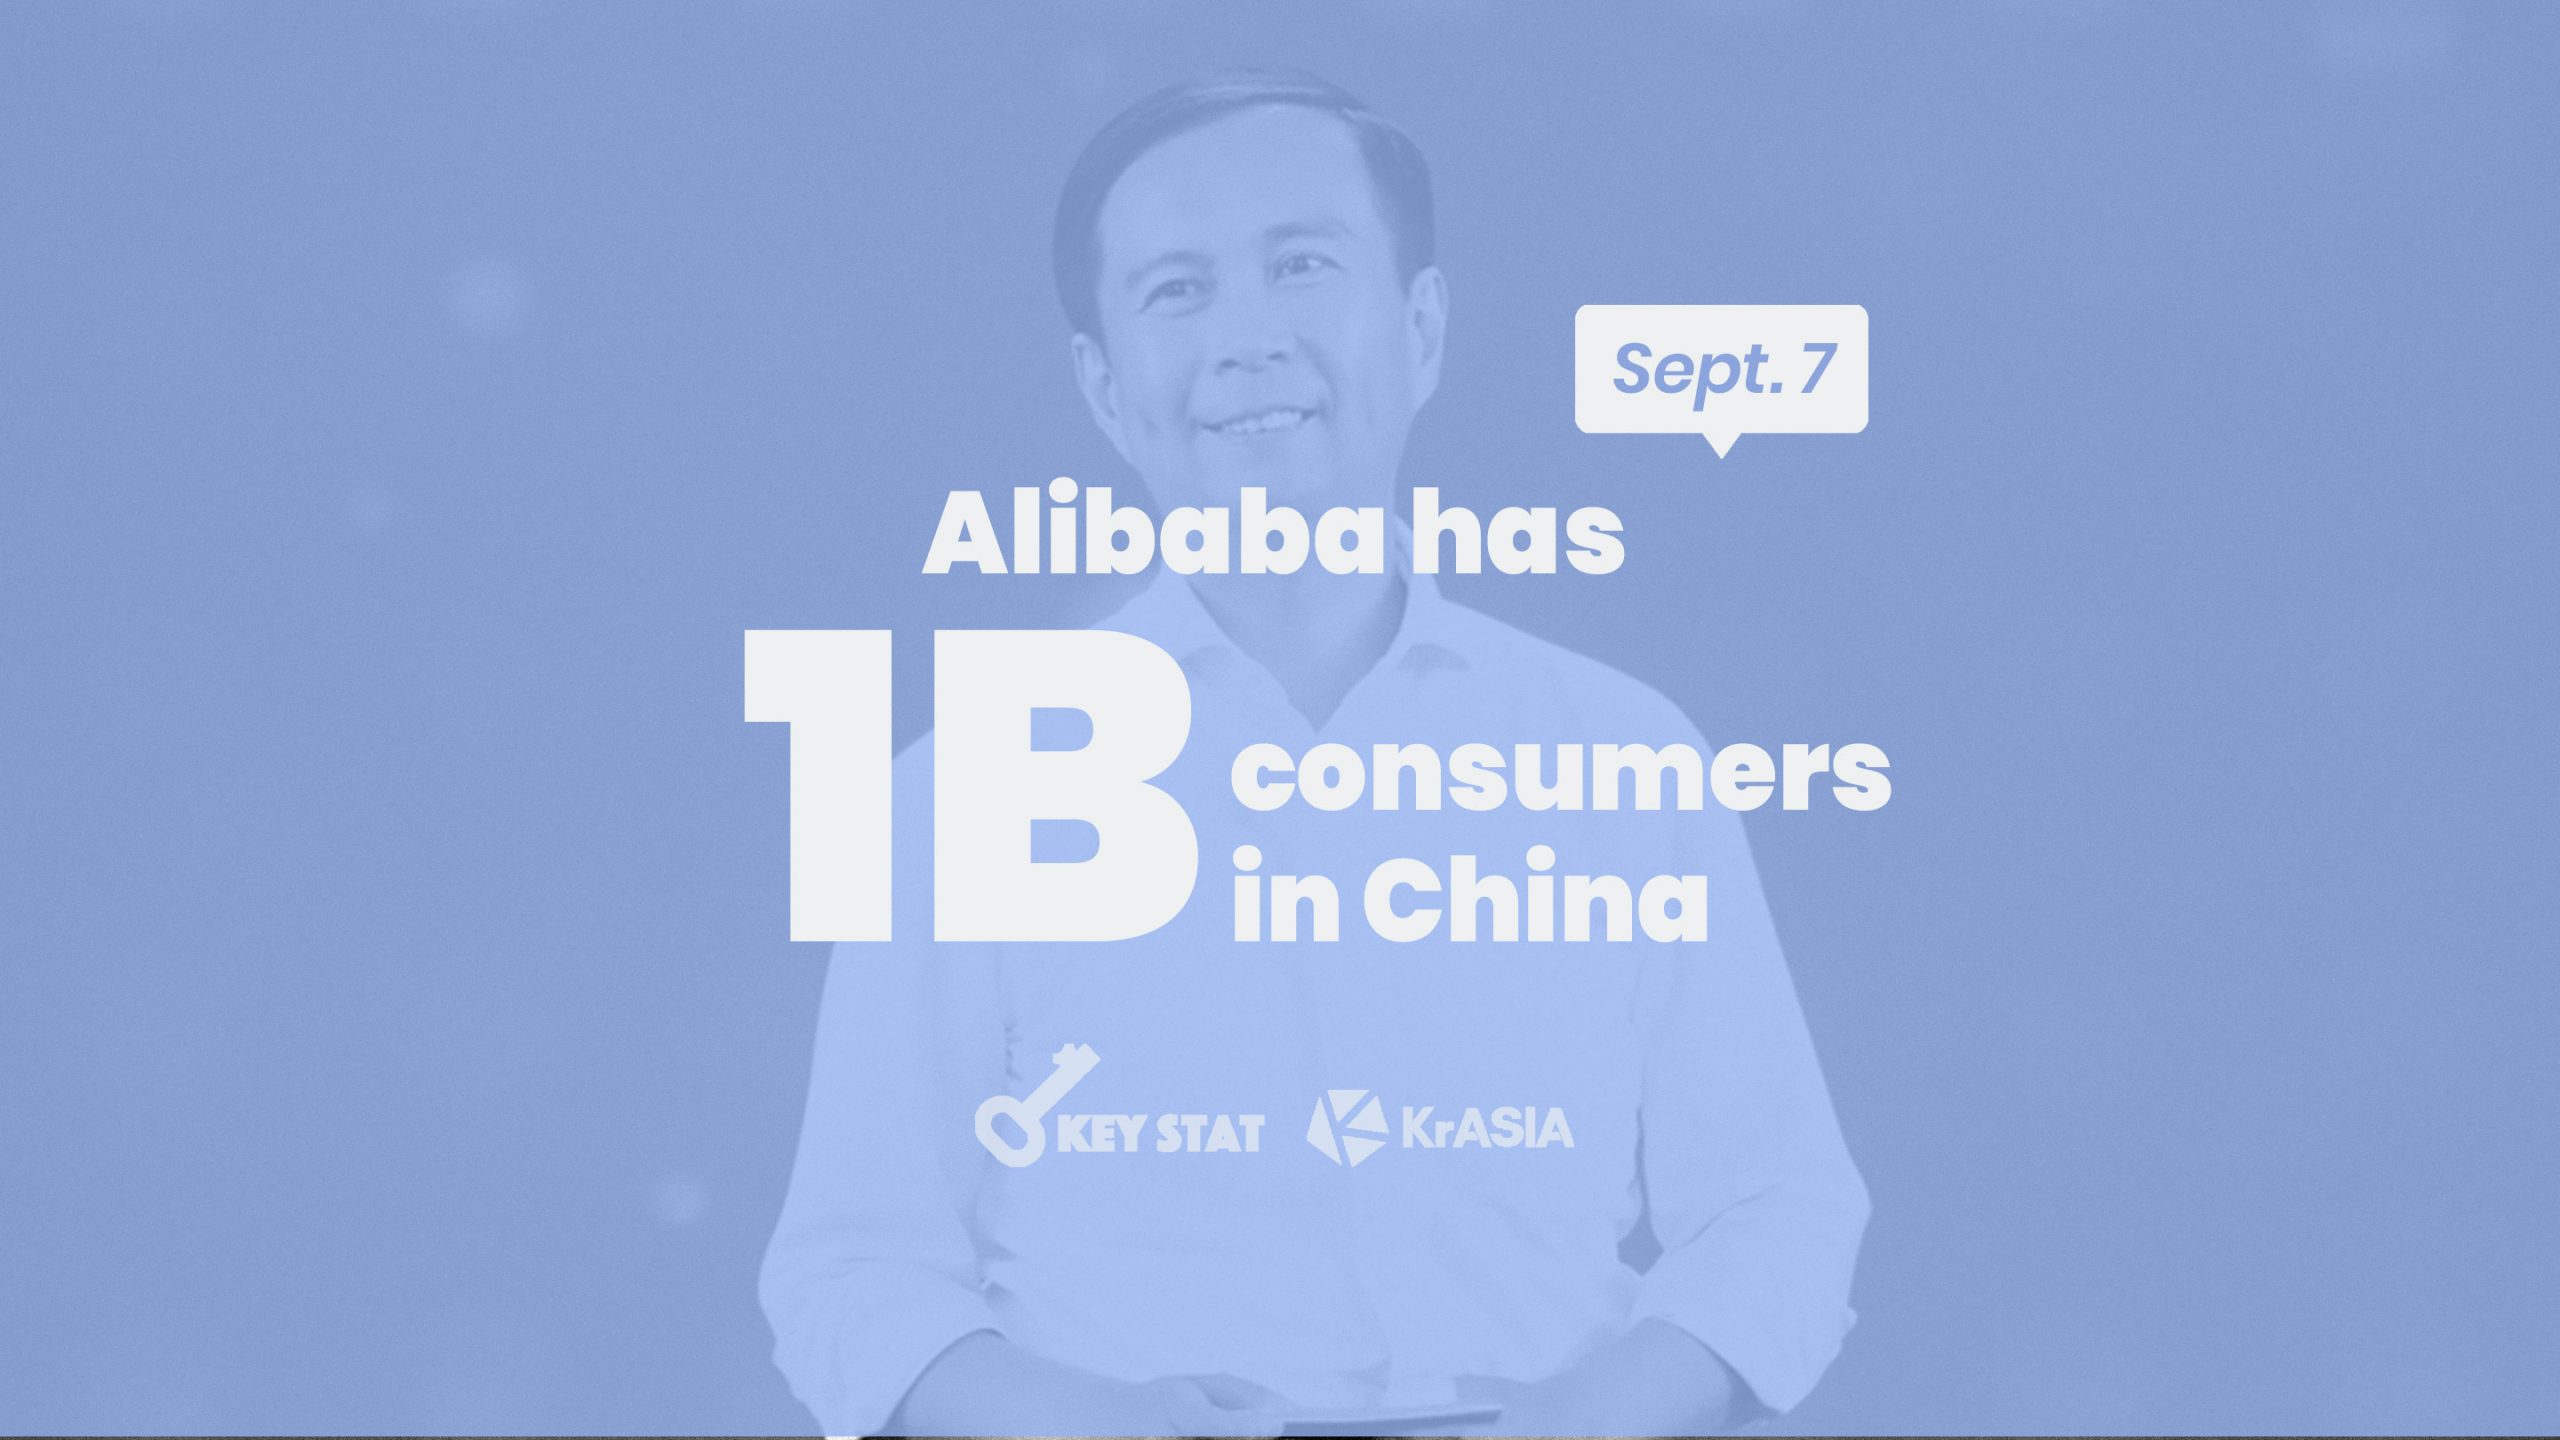 KEY STAT | Alibaba wants to serve 2 billion consumers globally by 2036